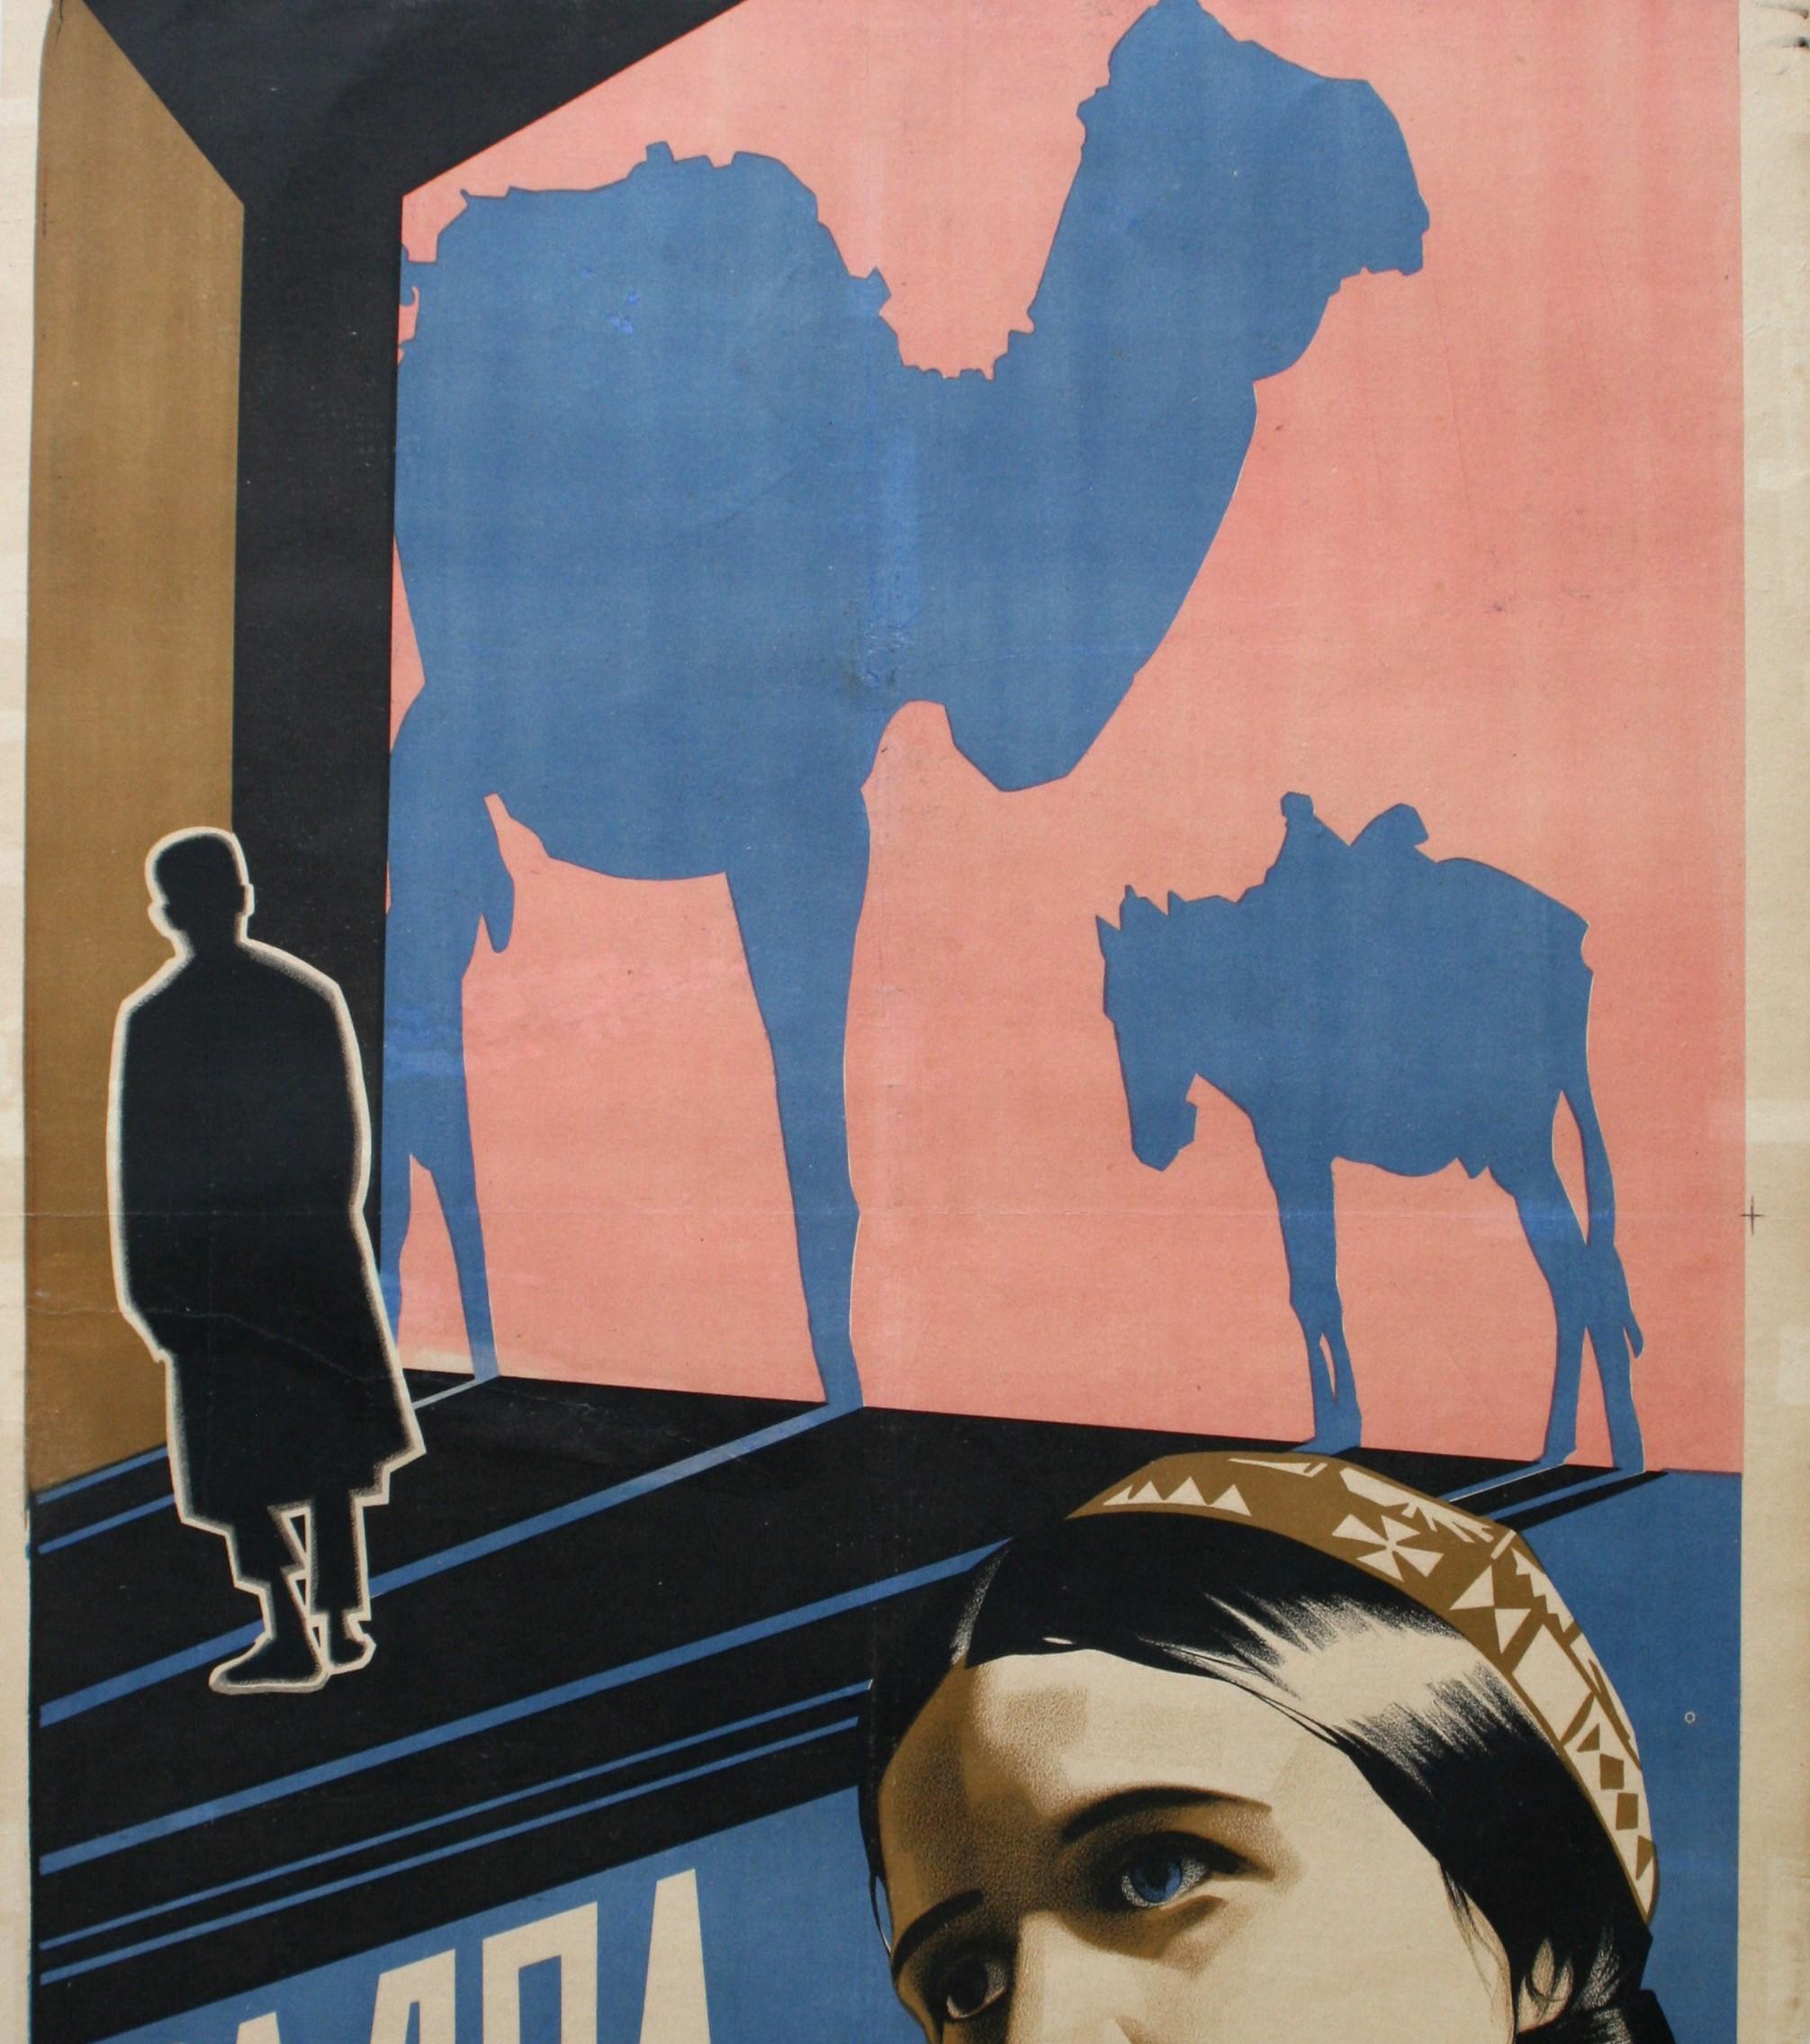 Russian Original Vintage Constructivist Poster For A Central Asian Film Chadra The Veil For Sale